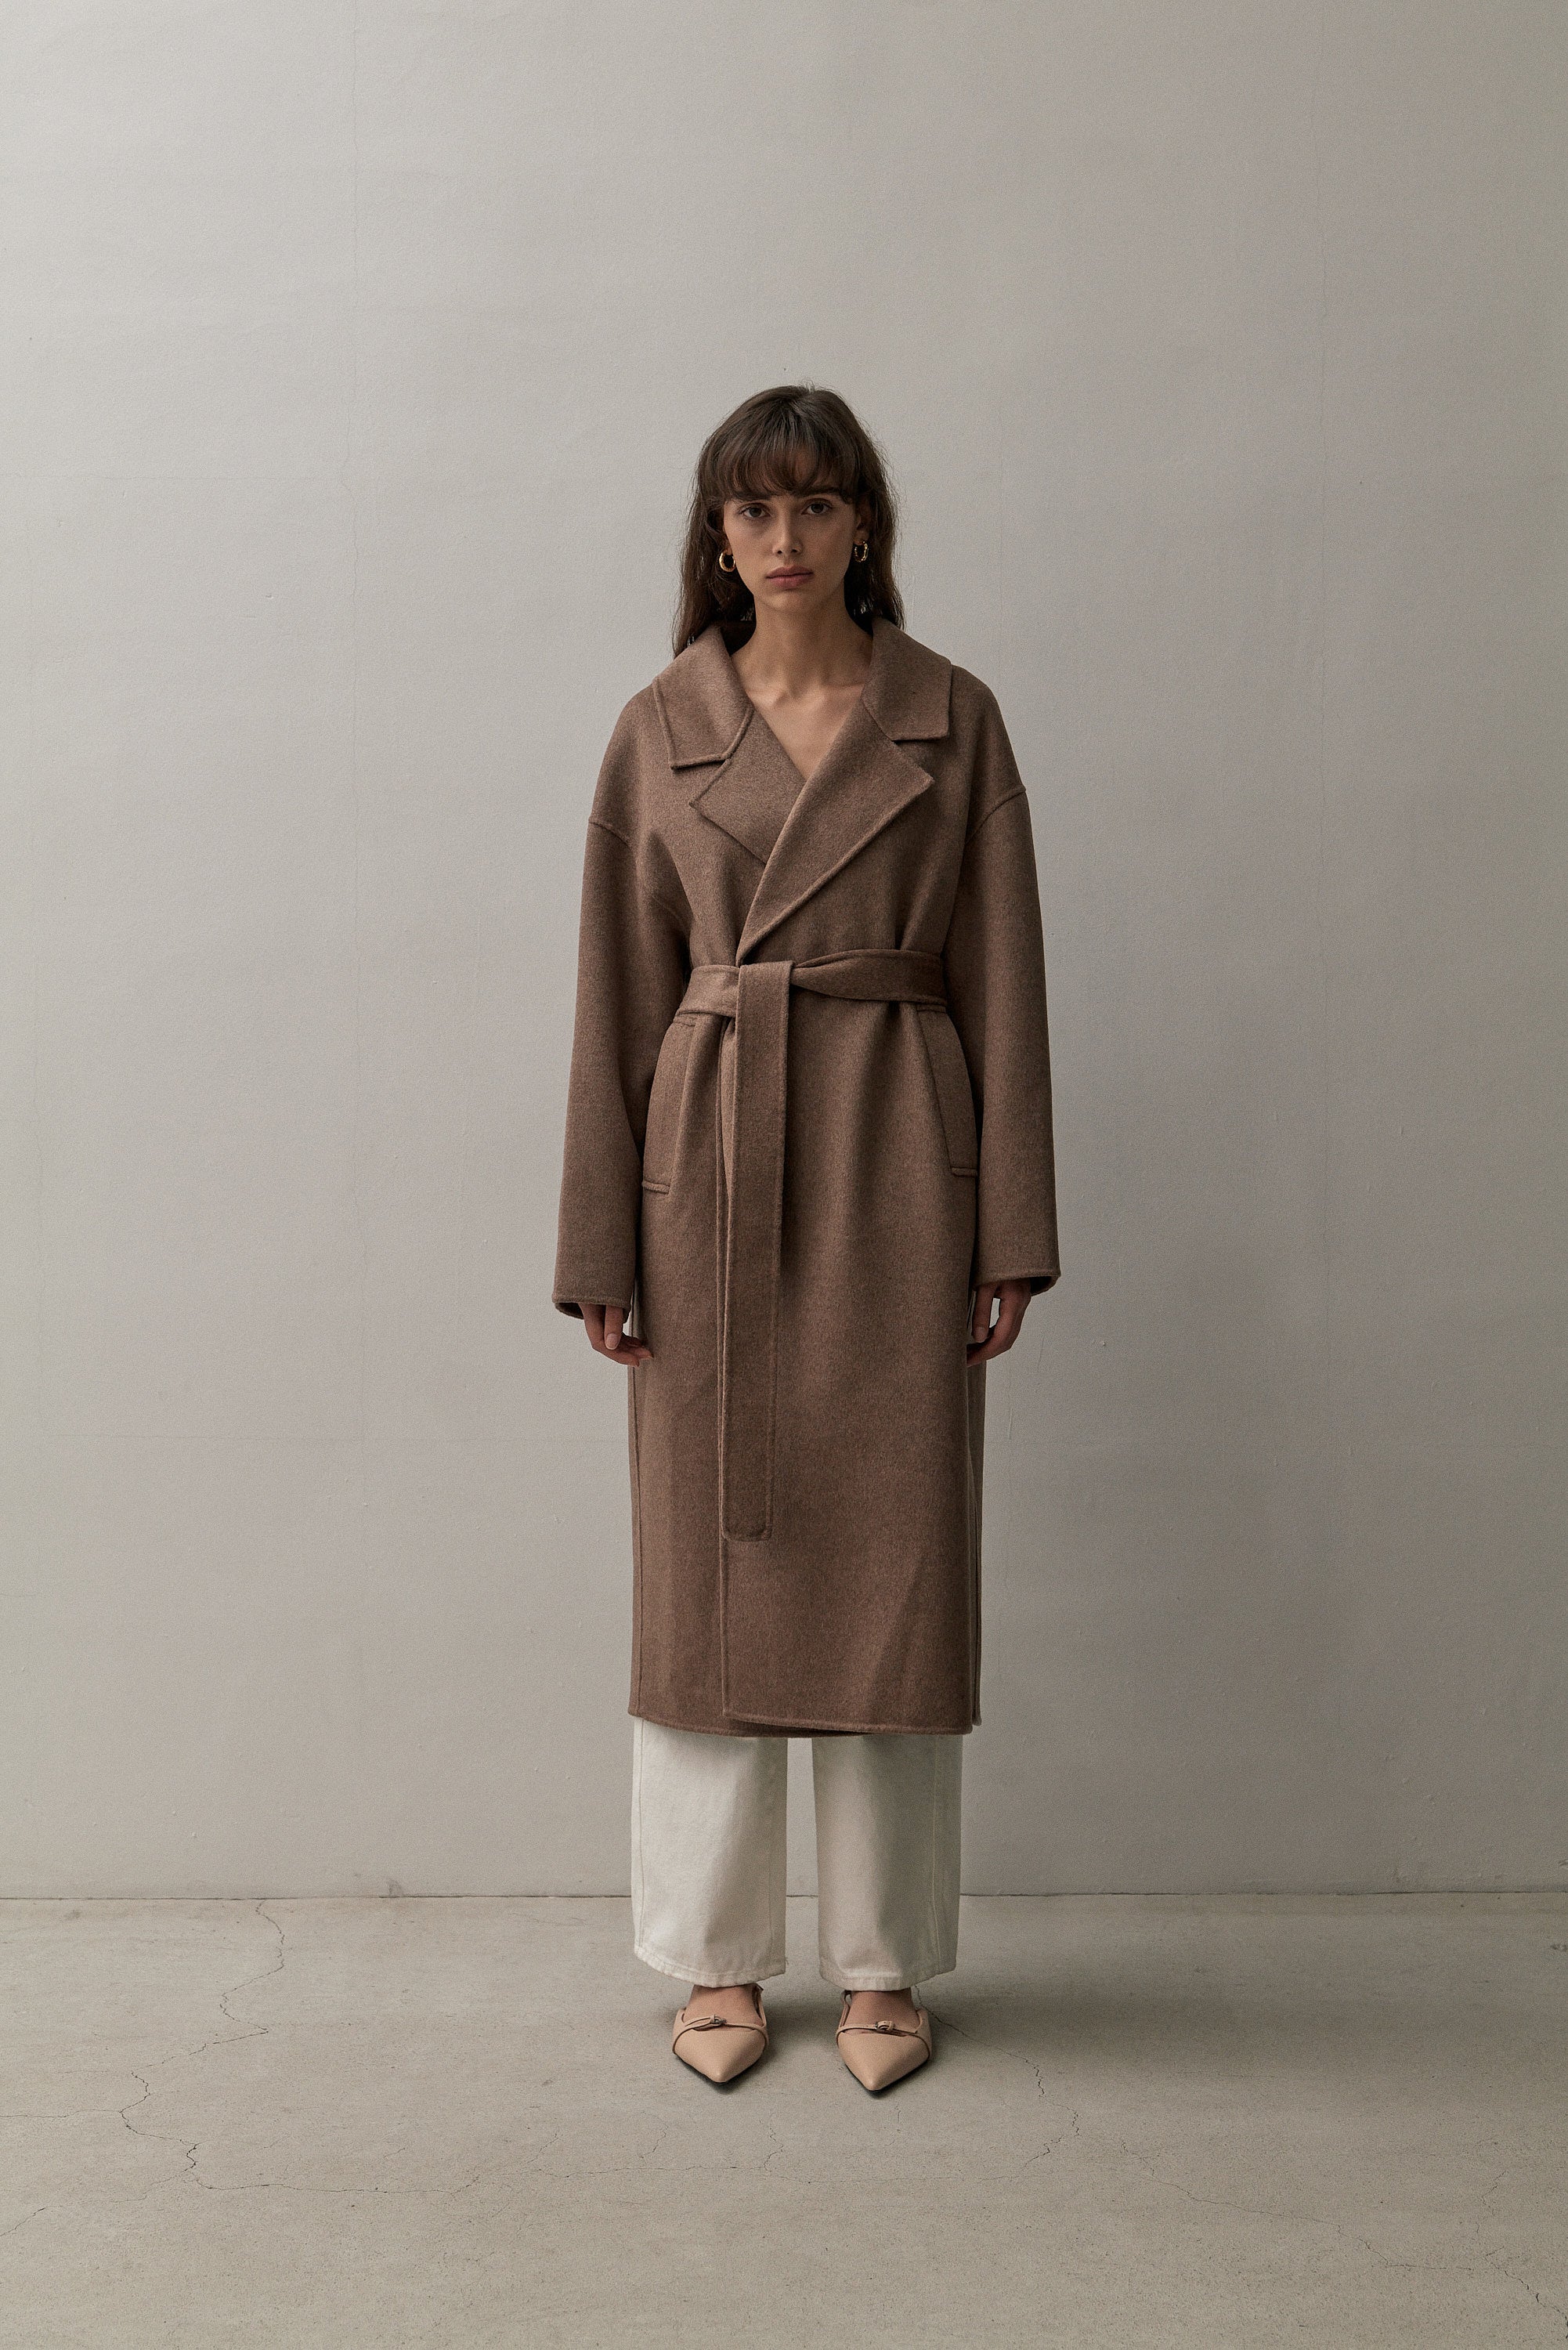 COATS – THE CURATED